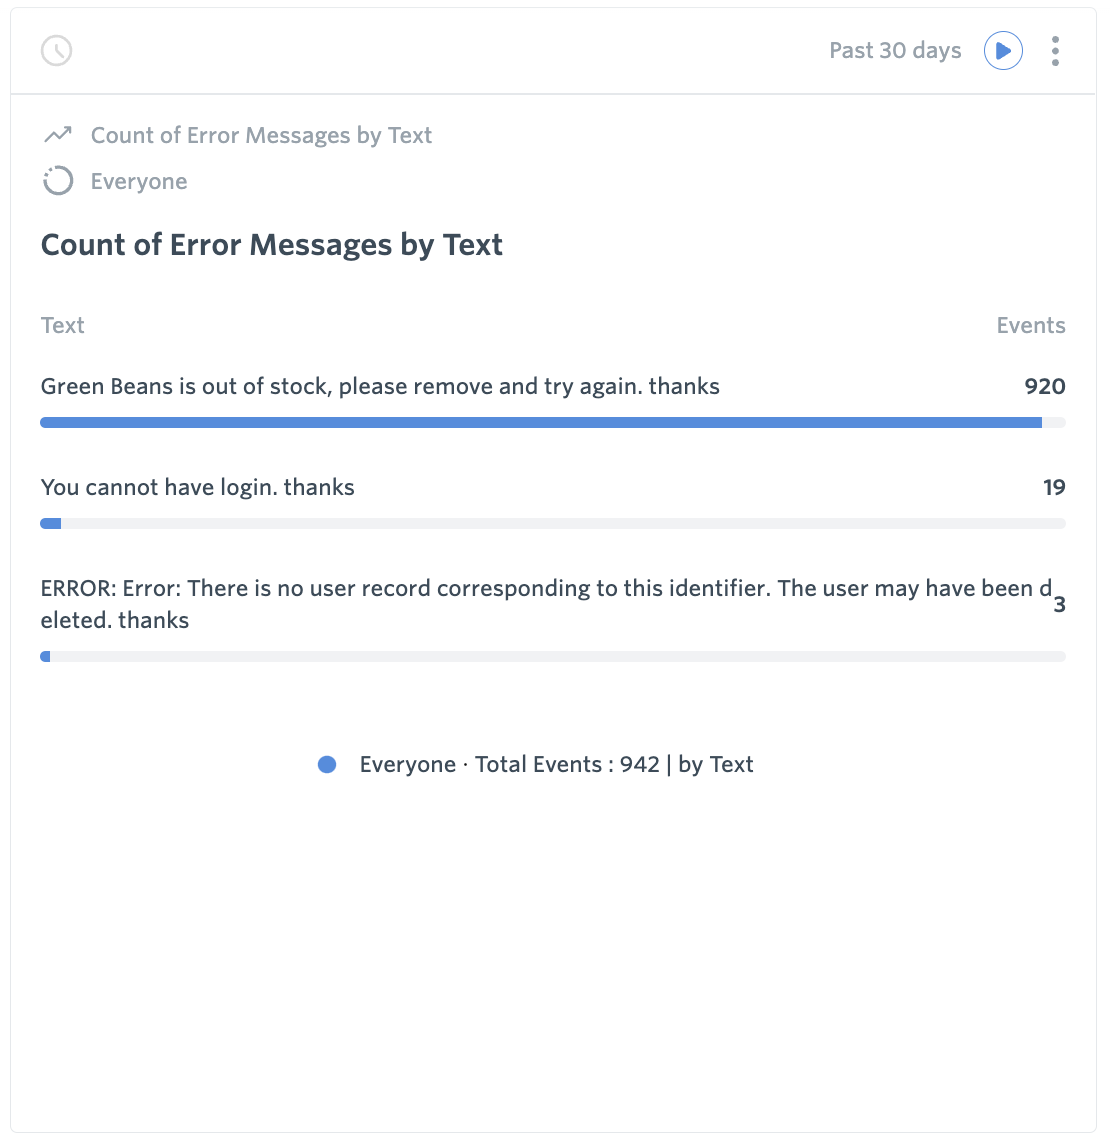 Count of Error Messages by Text